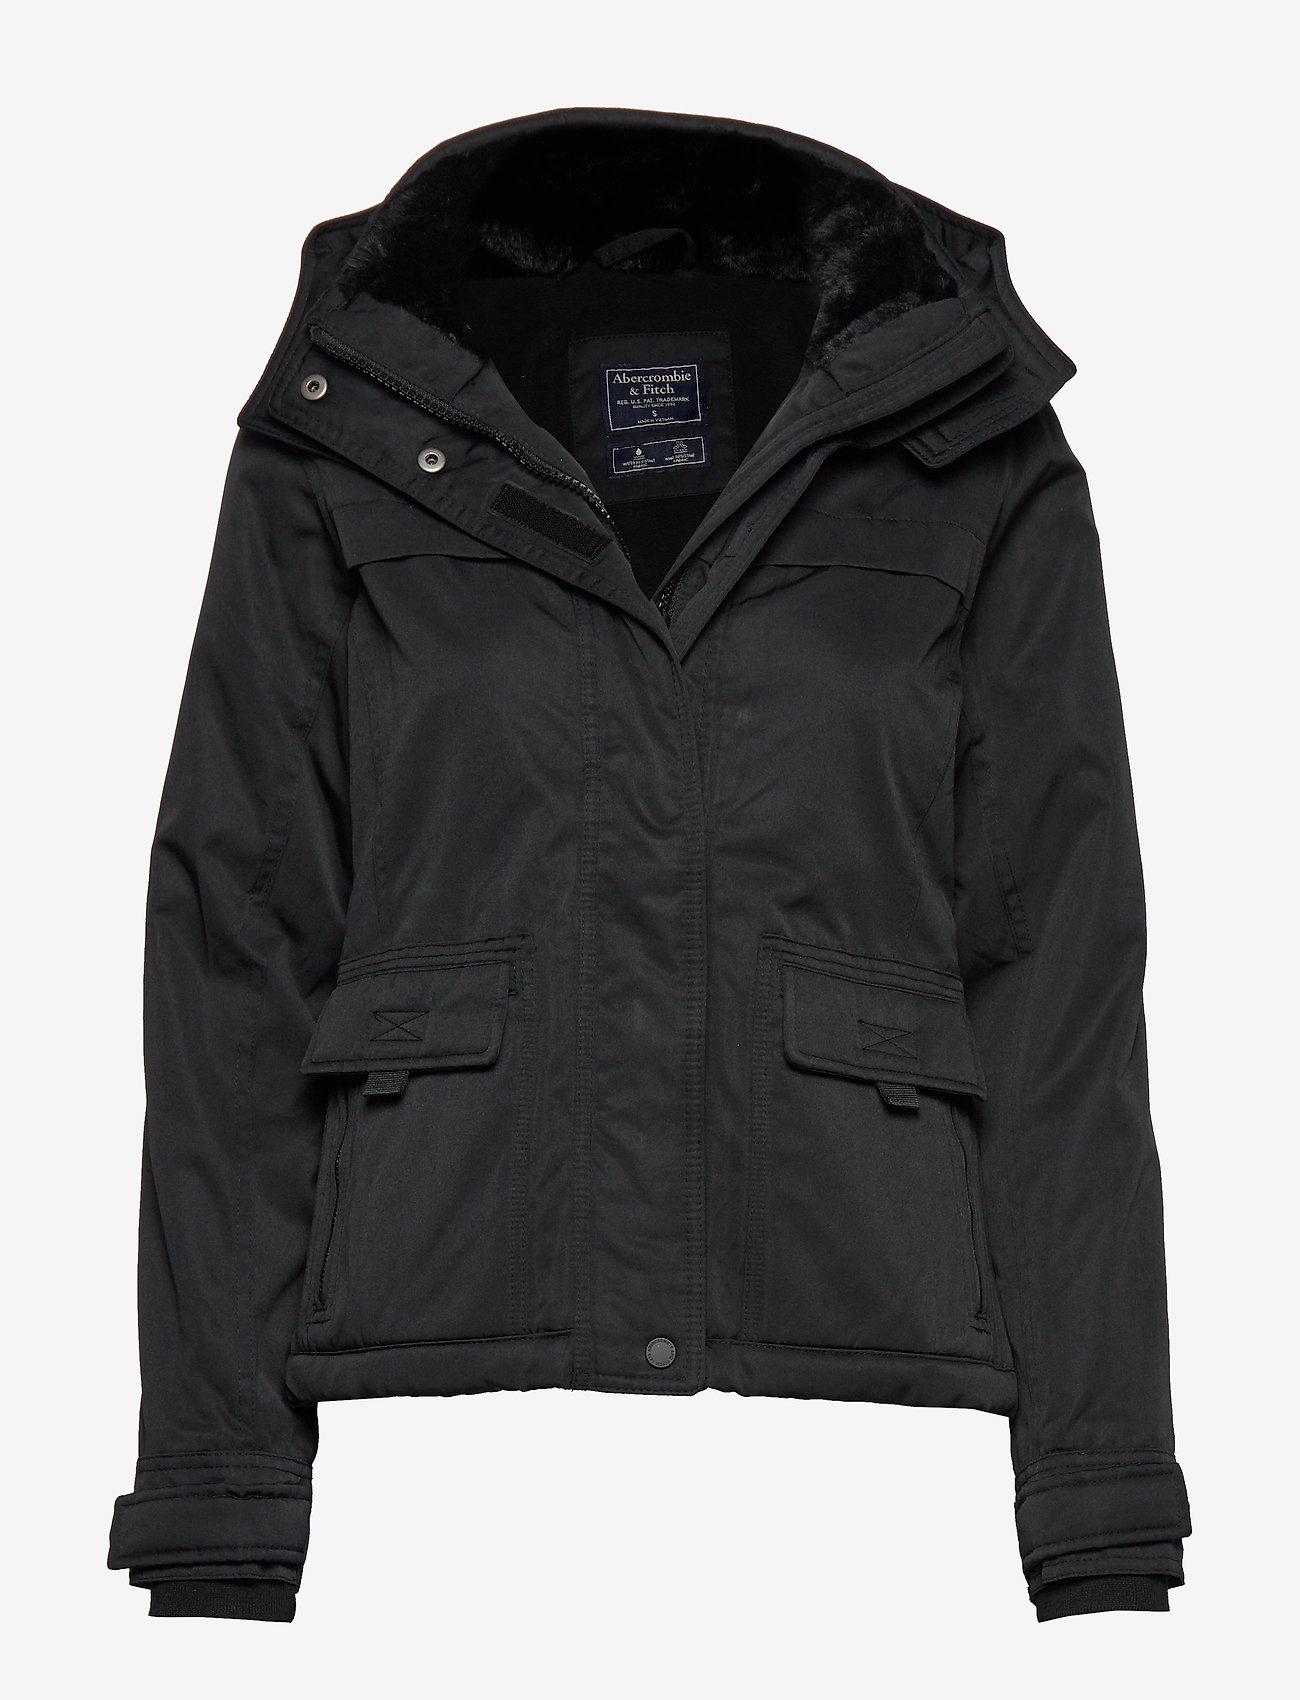 abercrombie and fitch black